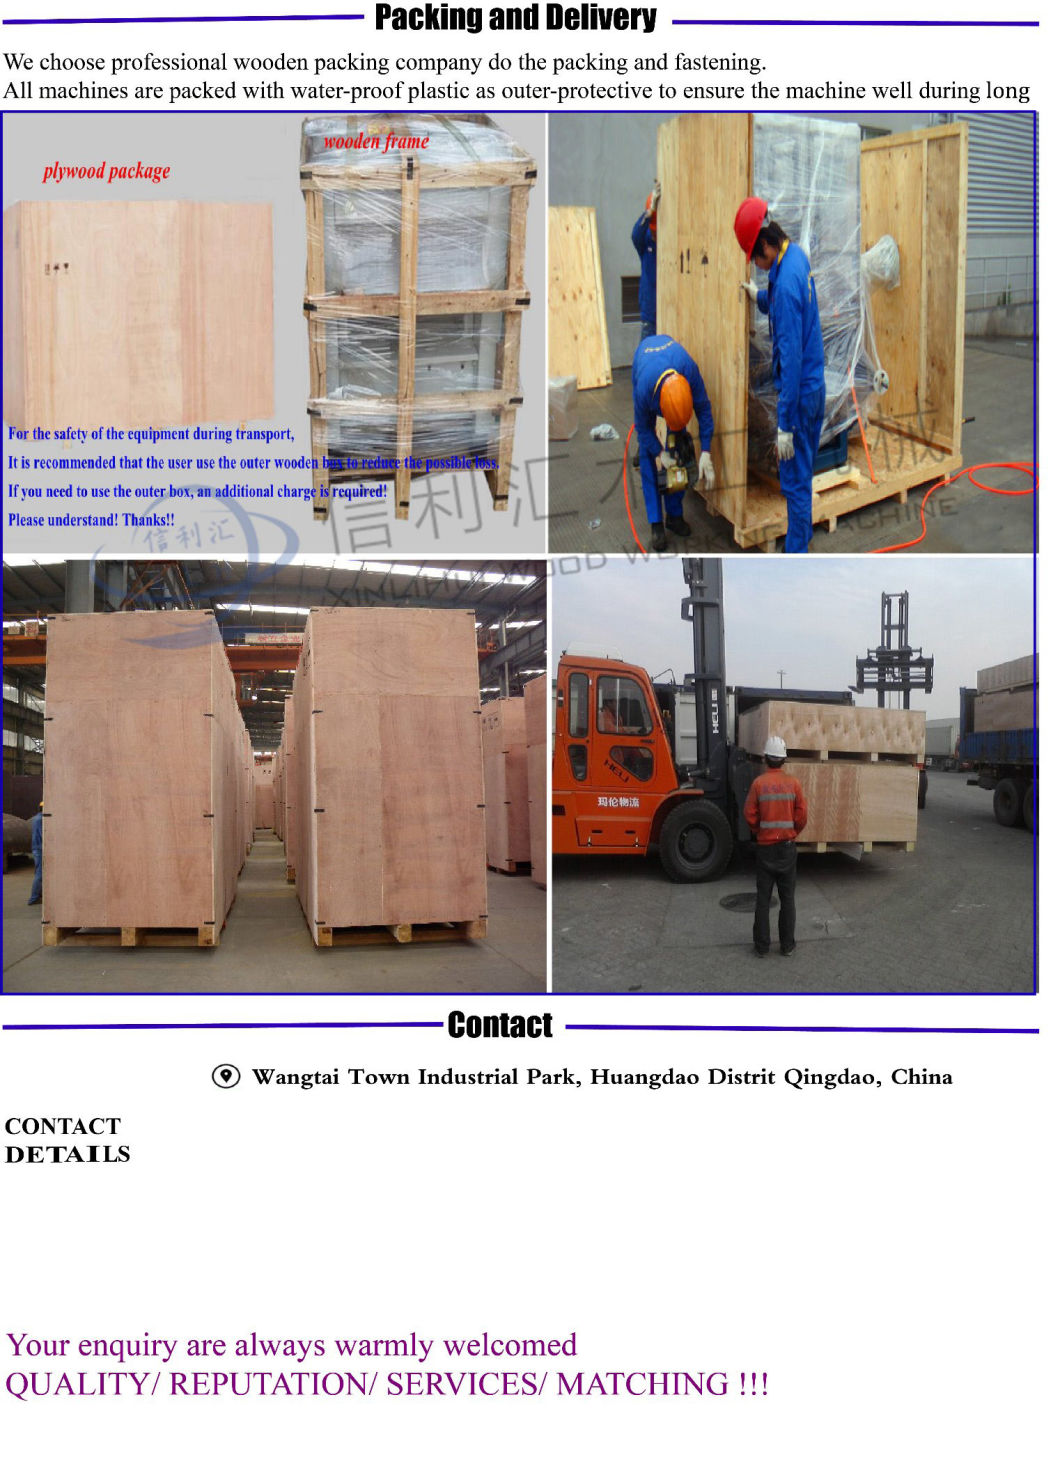 Plywood Assemble Line/ Plywood Industry Equipments Supplier Plywood Manufacturing Machinery/ Plywood Veneer Paving Machine